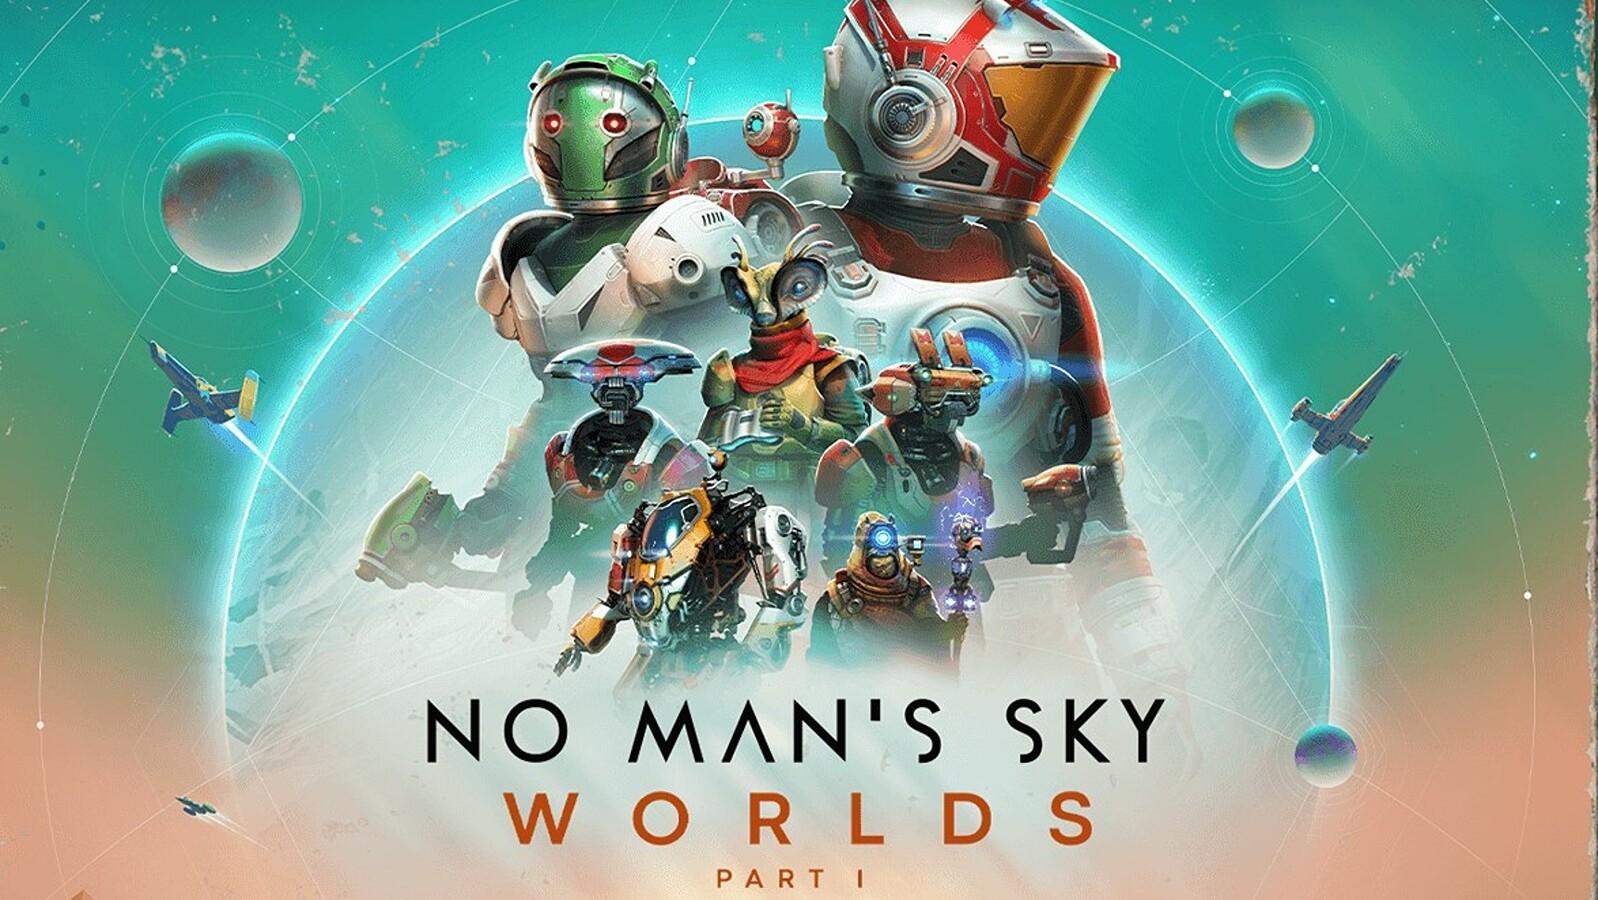 The Worlds Part 1 update for No Man's Sky